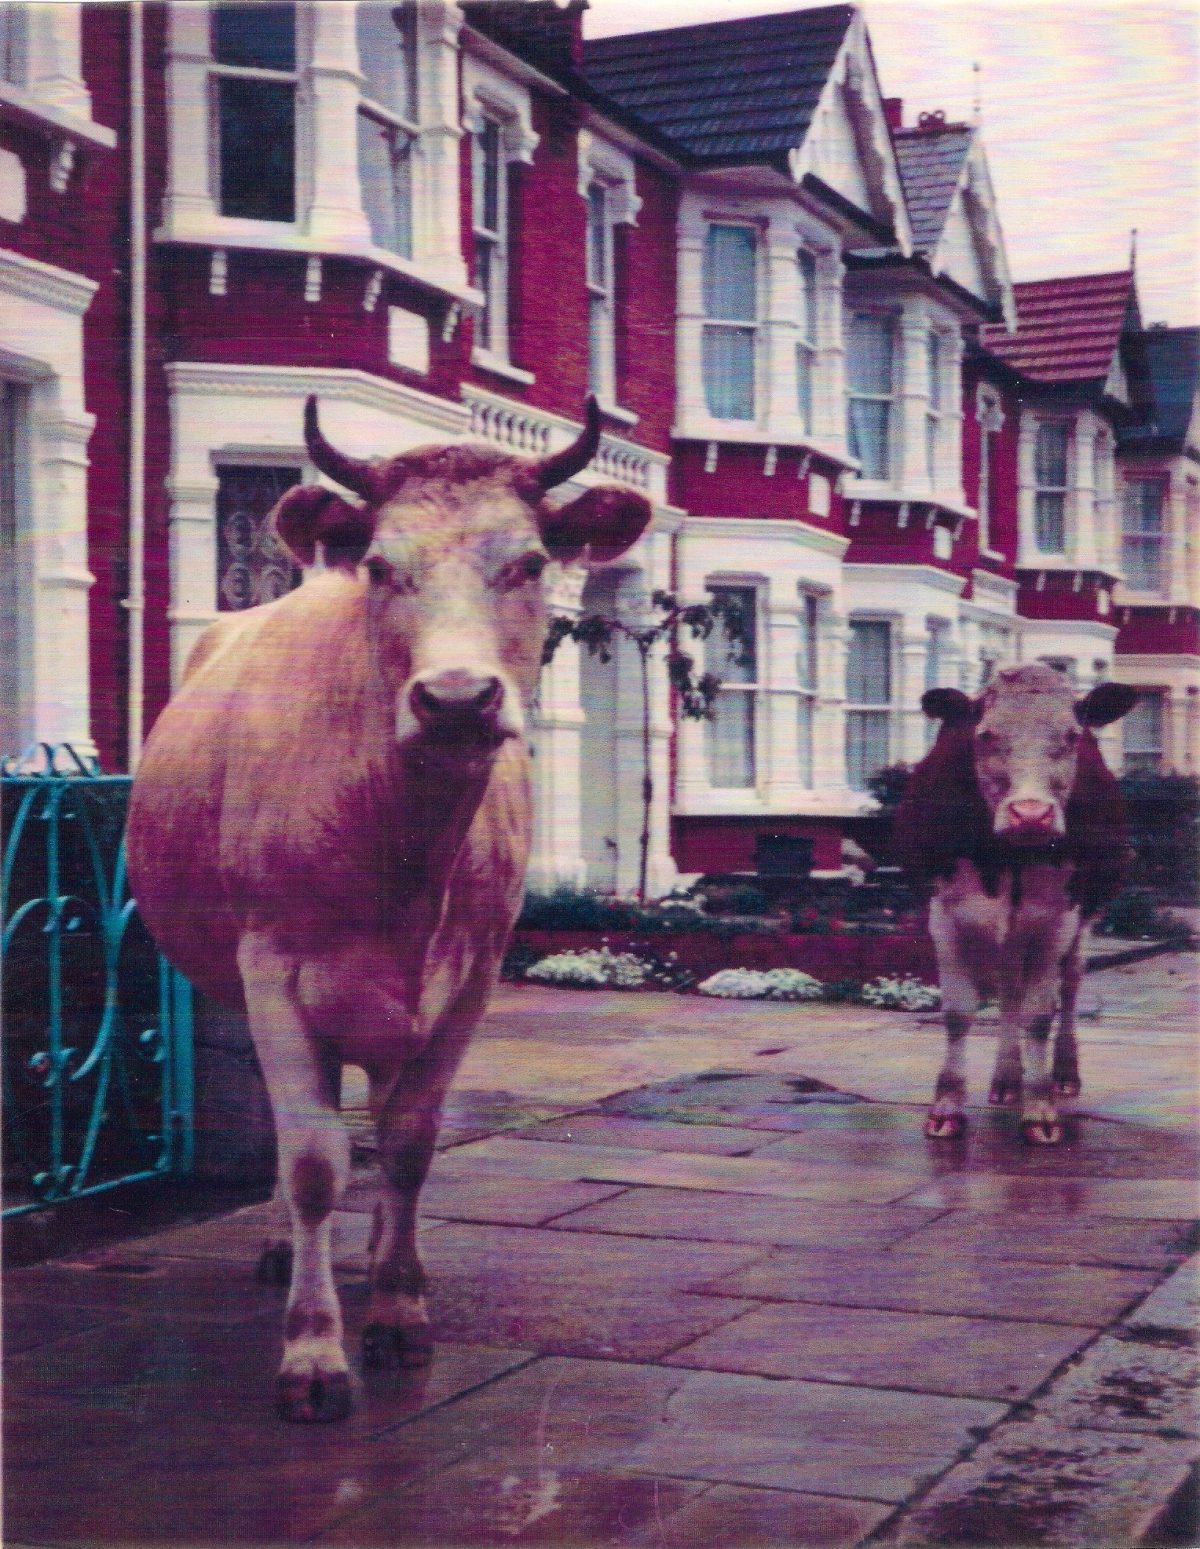 Roger Godbold's cows, as seen on Countryfile